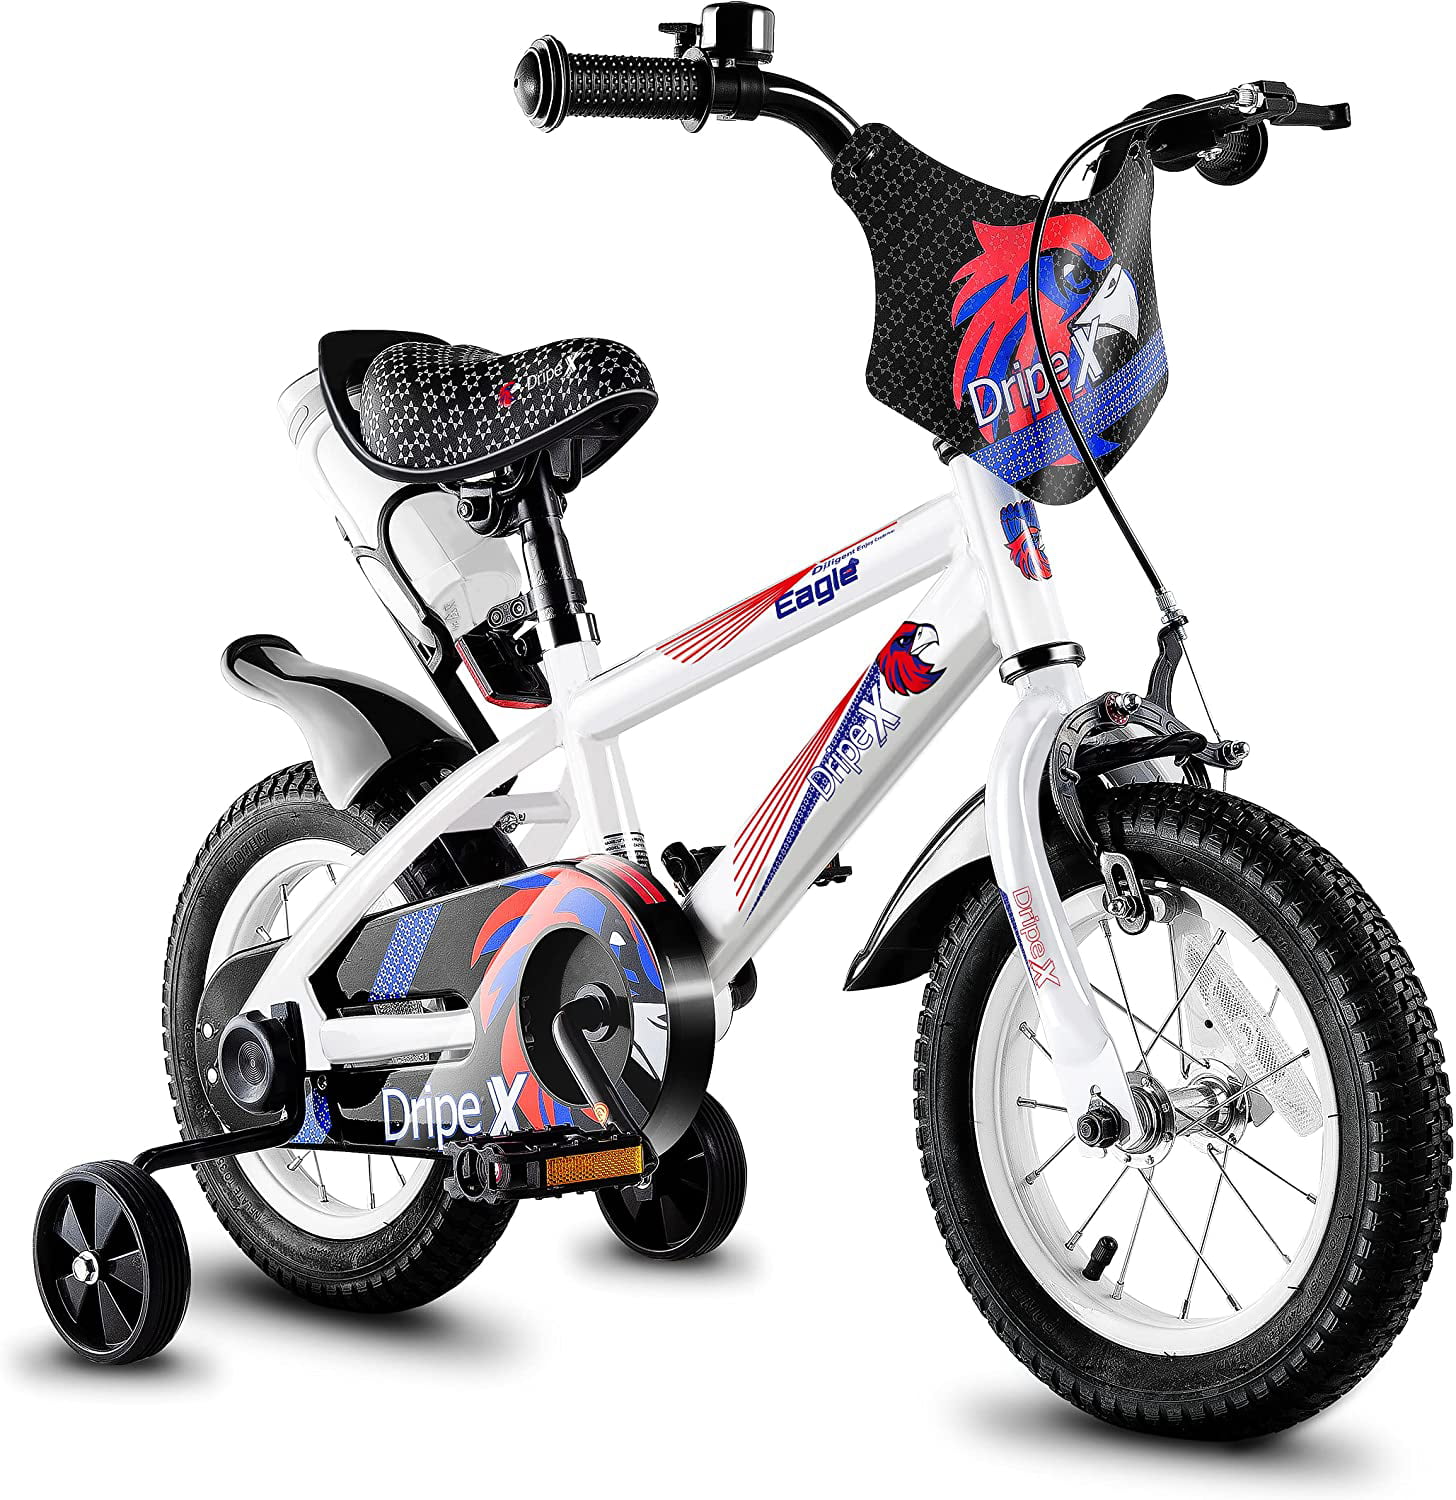 DRIPEX Boys Bike 20 inch Kids Bike 12/14/16/18 inch BMX Stytle for 3-10  Years Old Boy＆Girl Children Bicycle with Kickstand or Trainning Wheel,White  